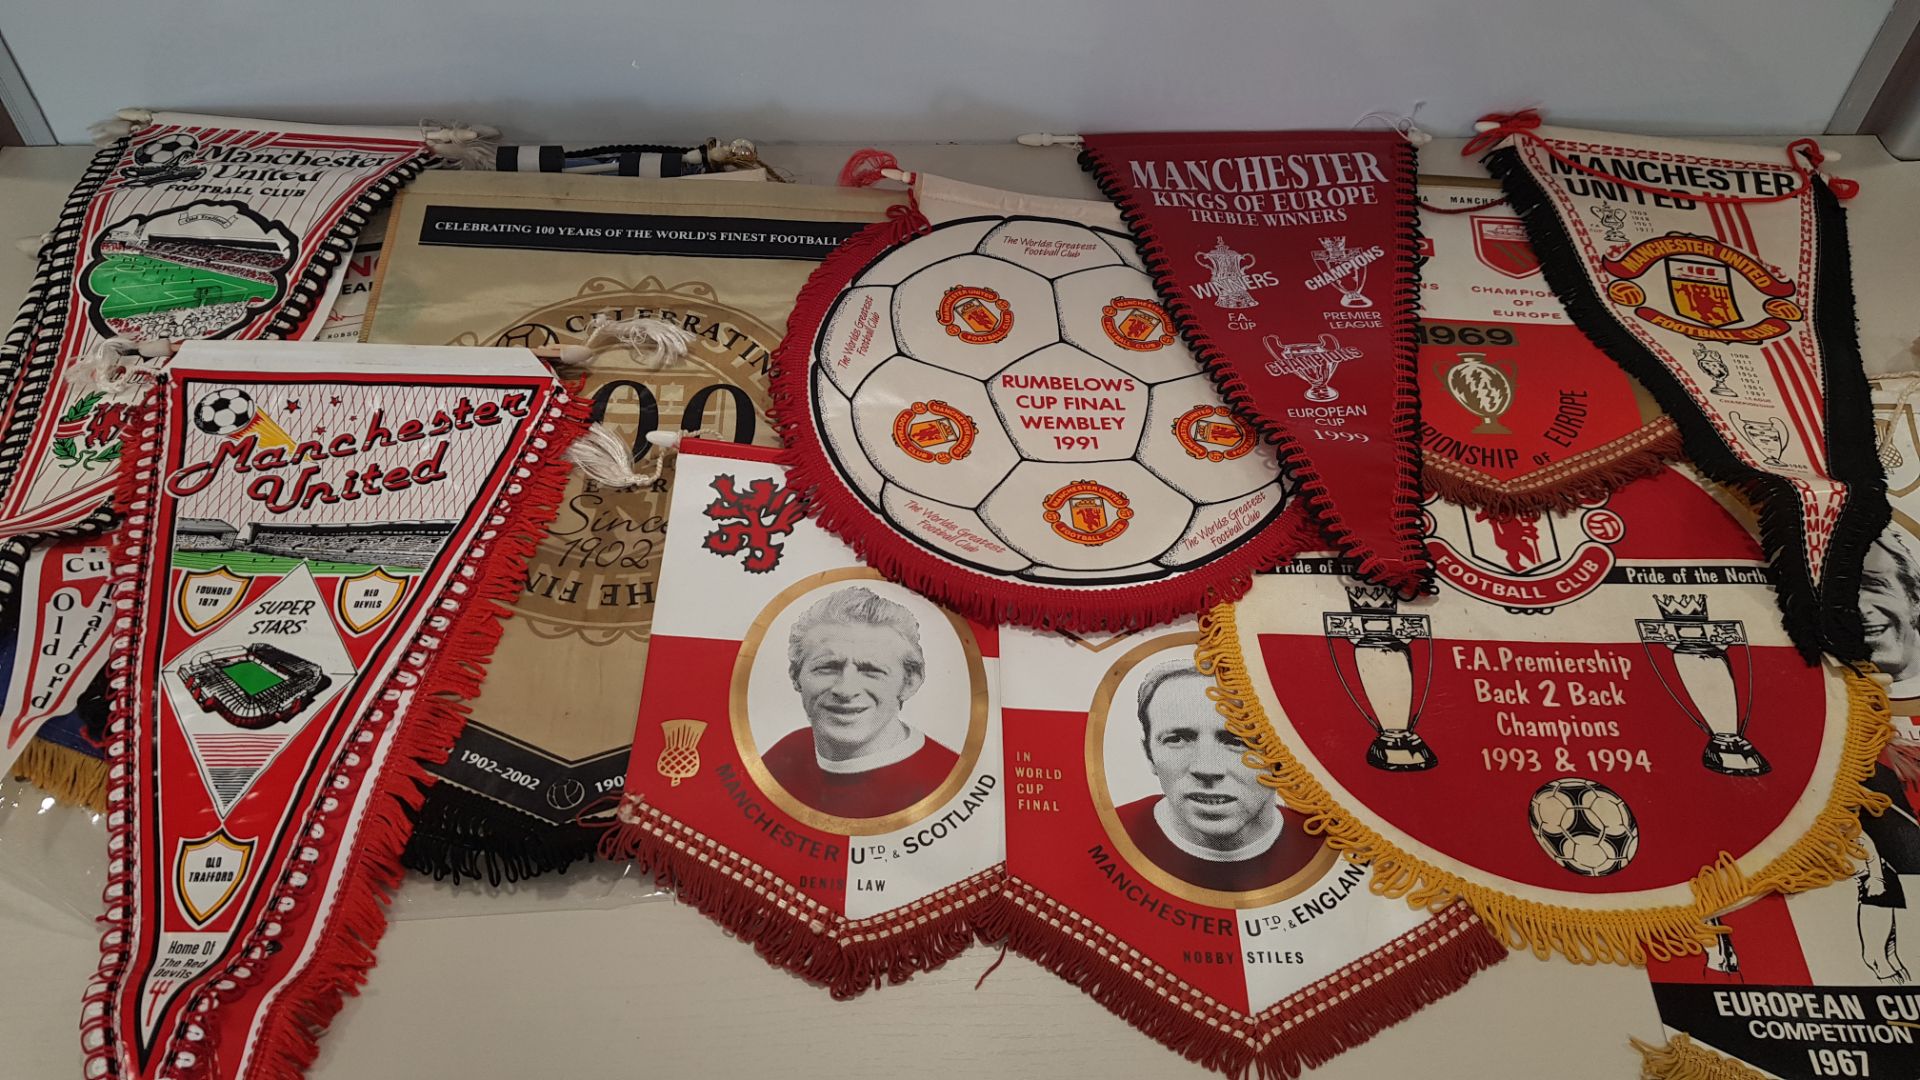 APPROX 100 X MANCHESTER UNITED PENDANTS TO INCLUDE - MAN UTD 1958, WEMBLEY CUP FINAL 1977, CHAMPIONS